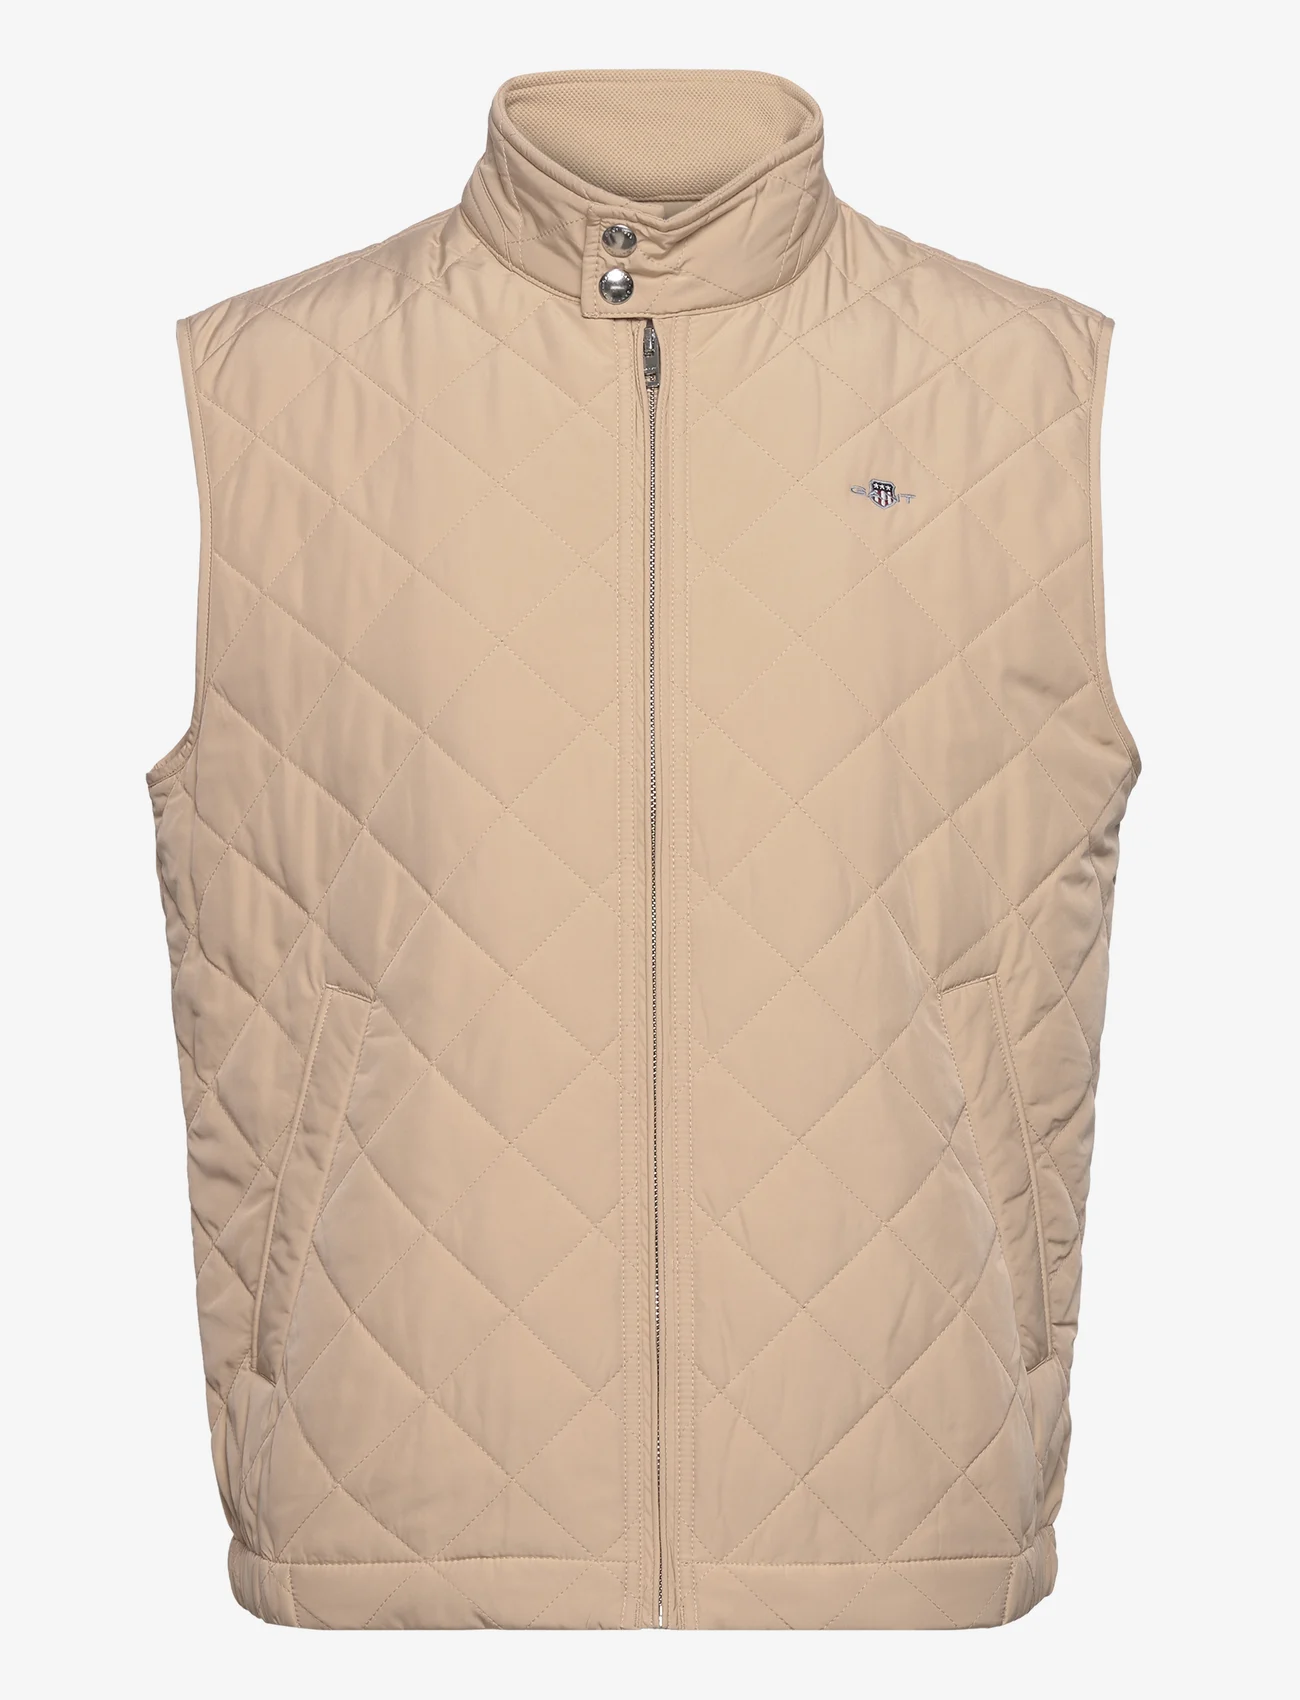 GANT - QUILTED WINDCHEATER VEST - bodywarmers - dry sand - 0